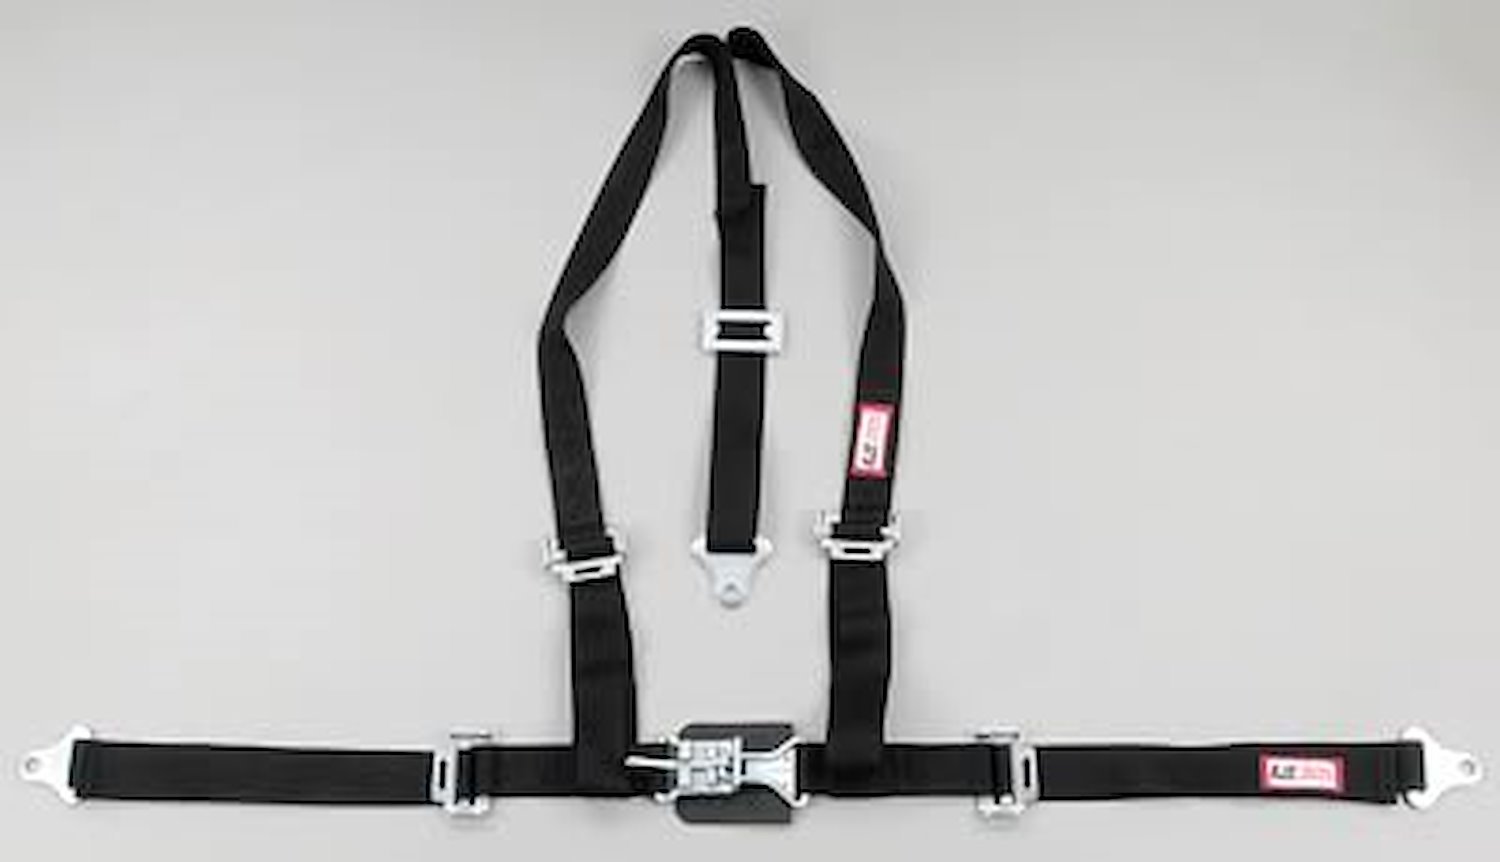 NON-SFI L&L HARNESS 2 PULL DOWN Lap Belt SNAP SEWN IN 2 S.H. Y FLOOR Mount WRAP/BOLT RED